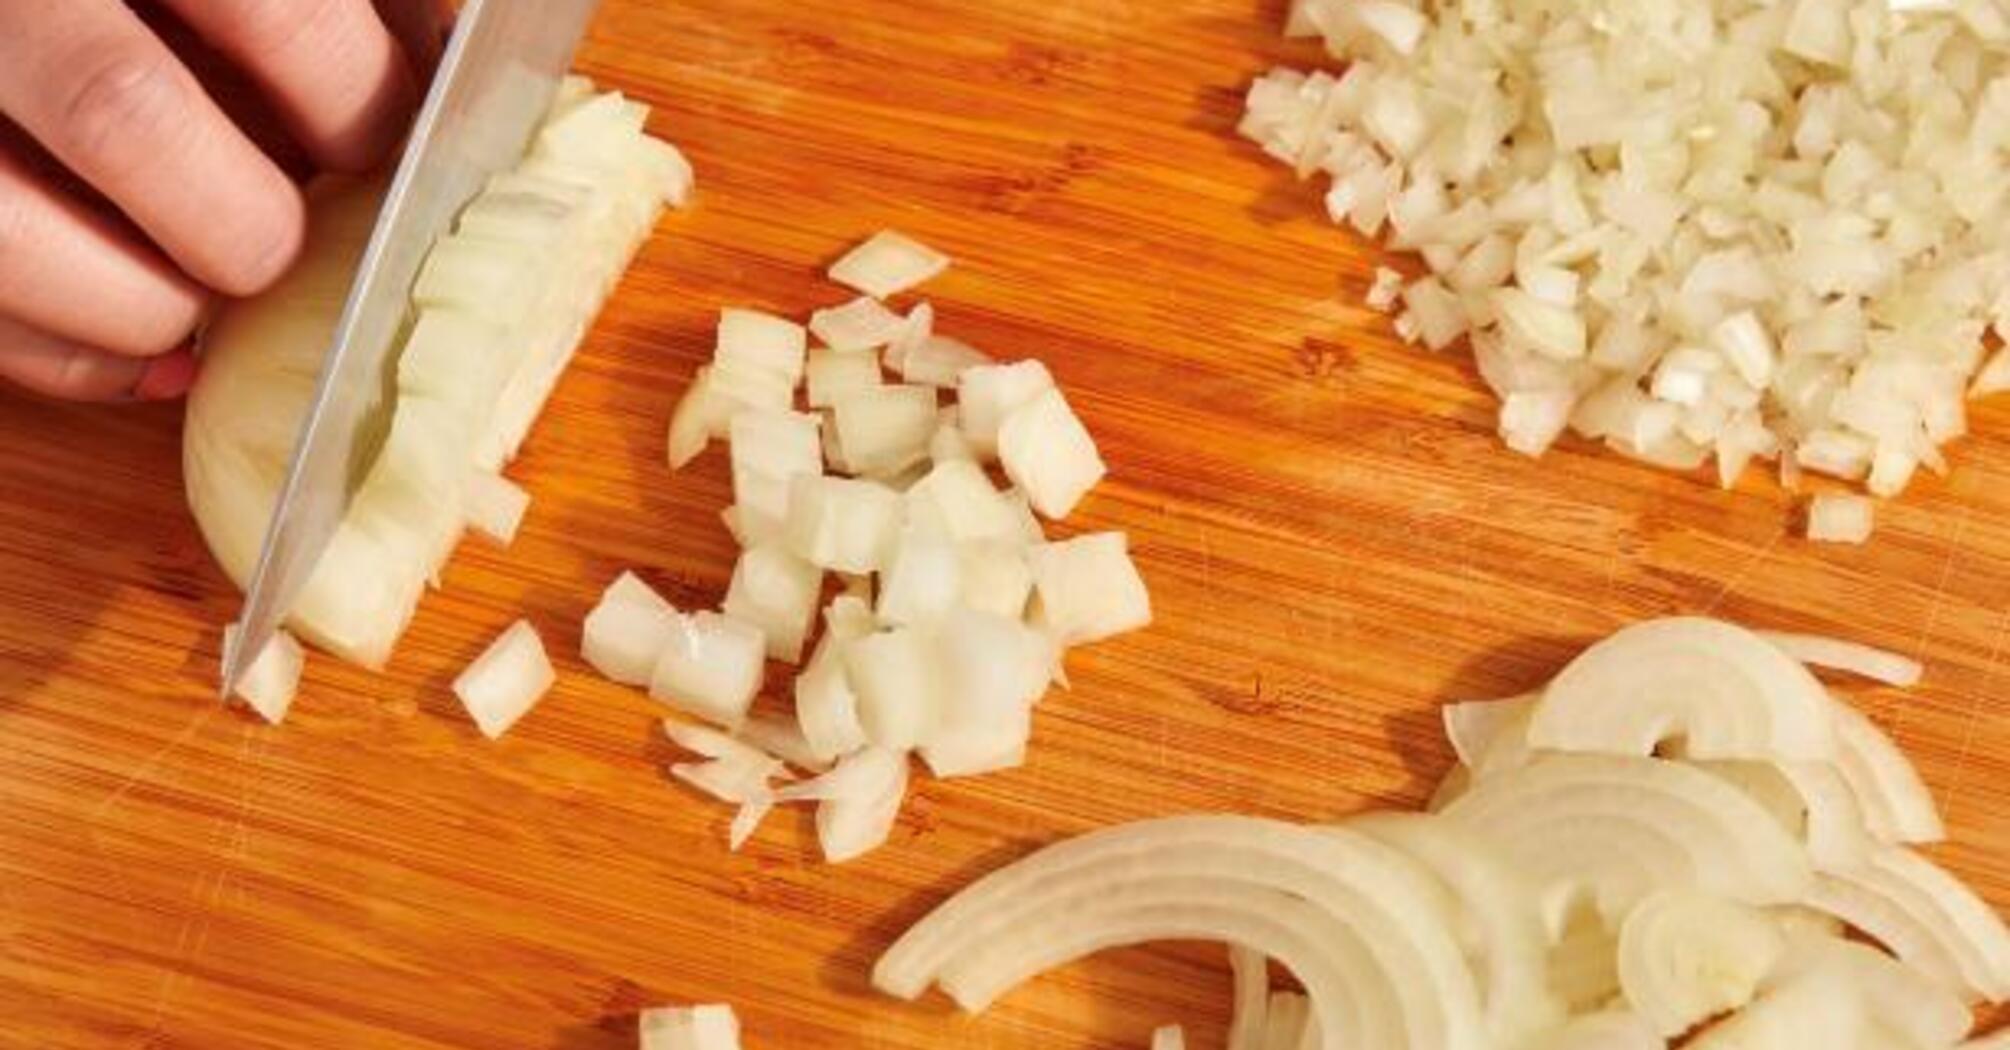 6 tips to cut onions without shedding tears